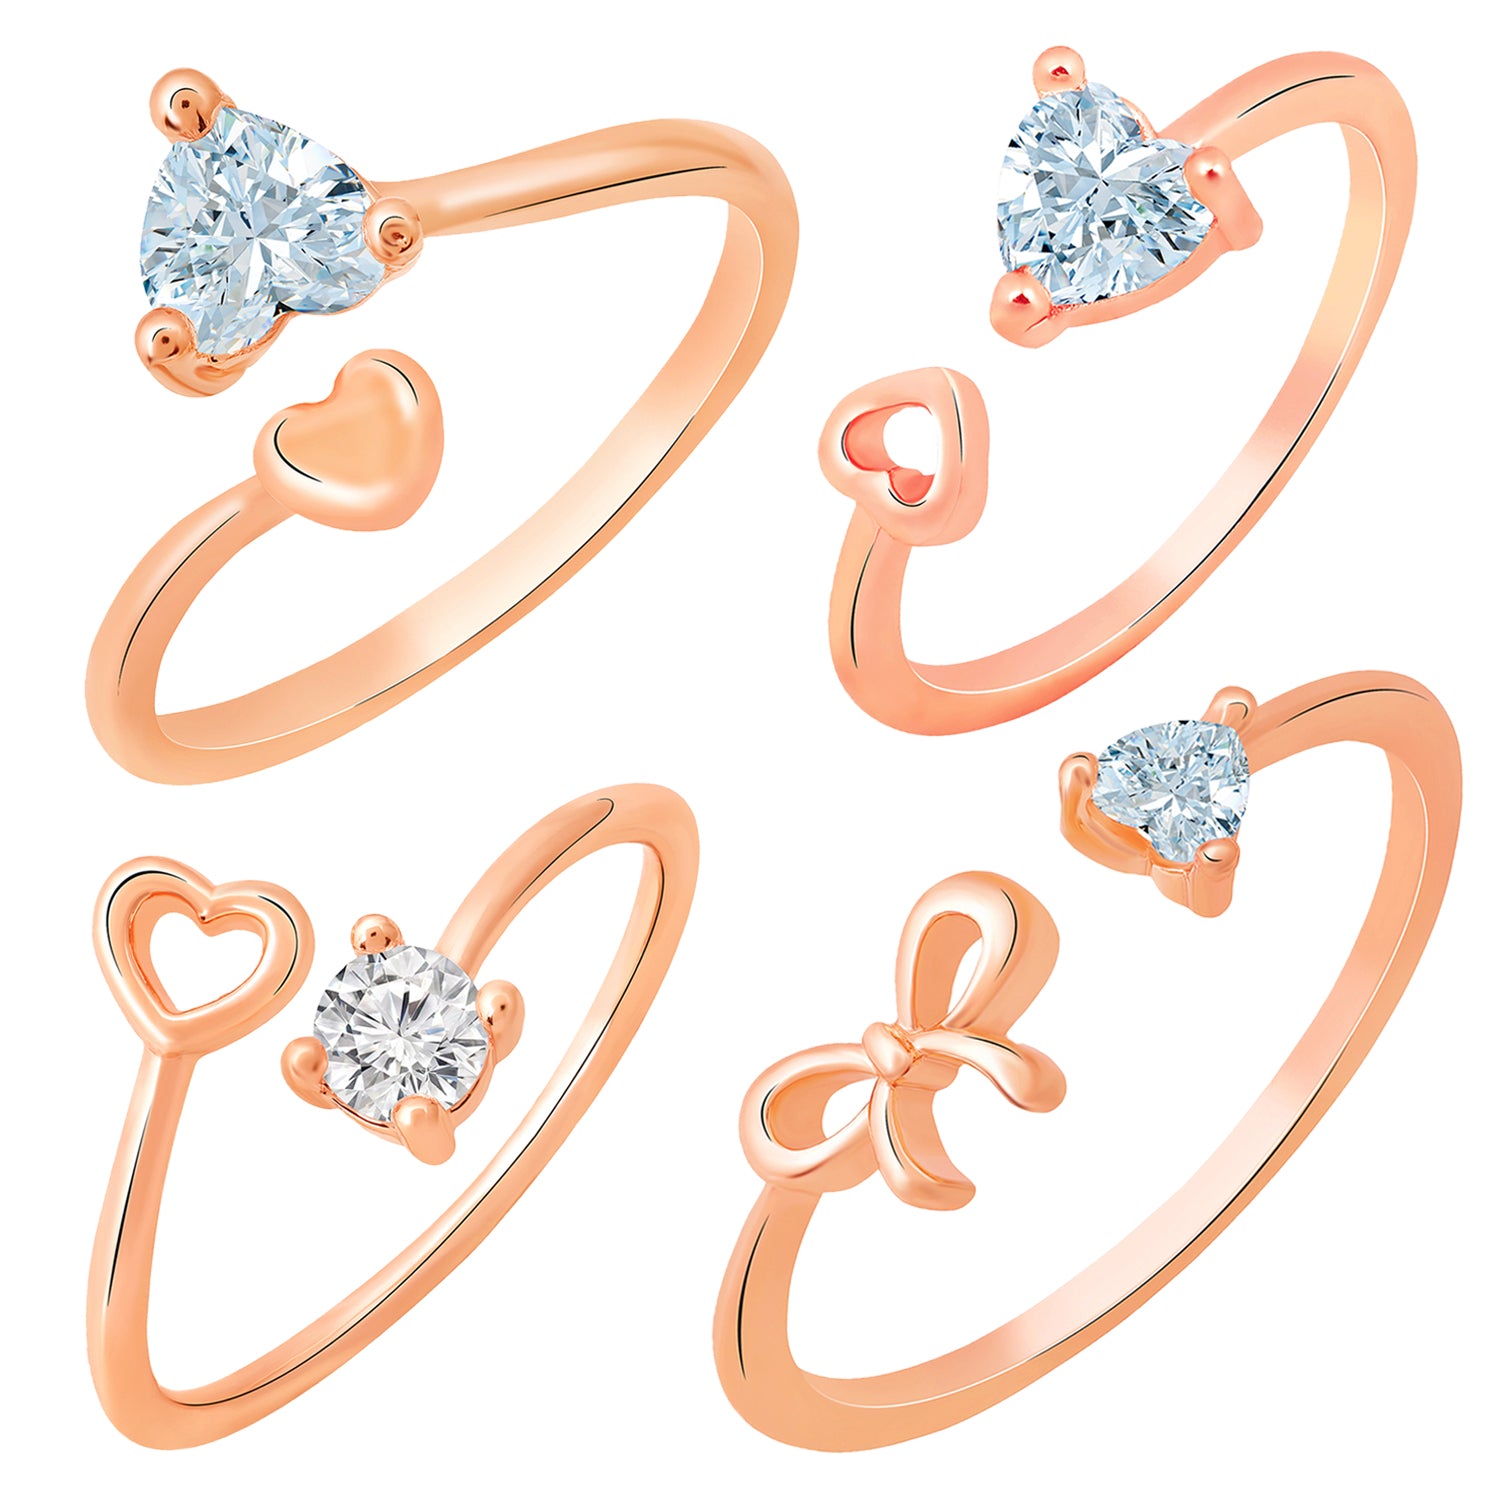 Combo of 4 Heart Shaped Adjustable Finger Rings